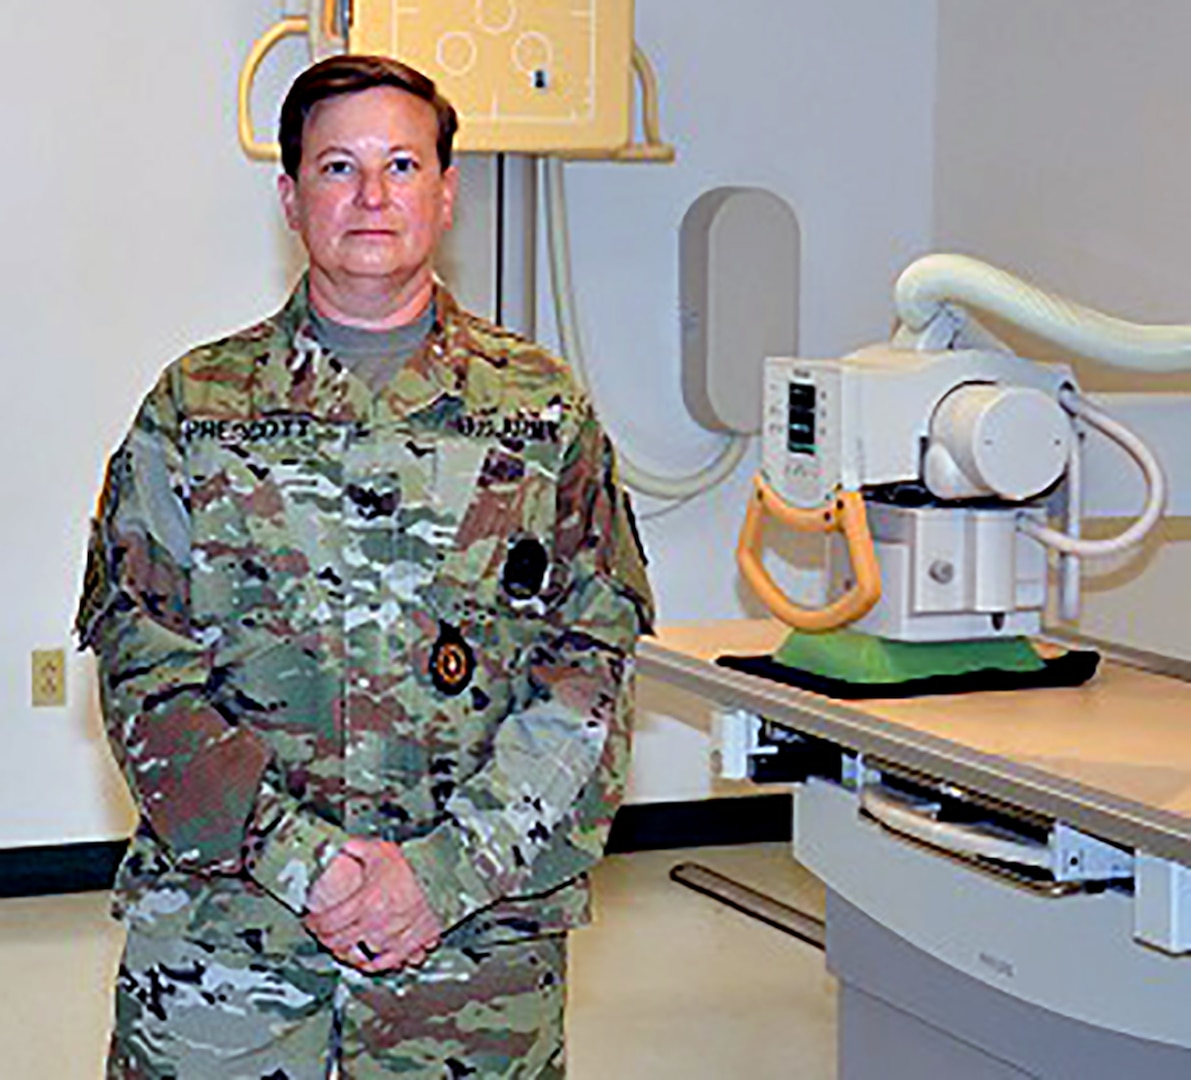 Staff Sgt. Karrie Prescott, a Medical Education and Training Campus Radiologic Technologist program instructor assigned to the U.S. Army Medical Center of Excellence at Joint Base San Antonio-Fort Sam Houston, and her wife came to the aid of a car crash victim who did not have a pulse and was struggling to breathe, so they began administering CPR until emergency medical services arrived.